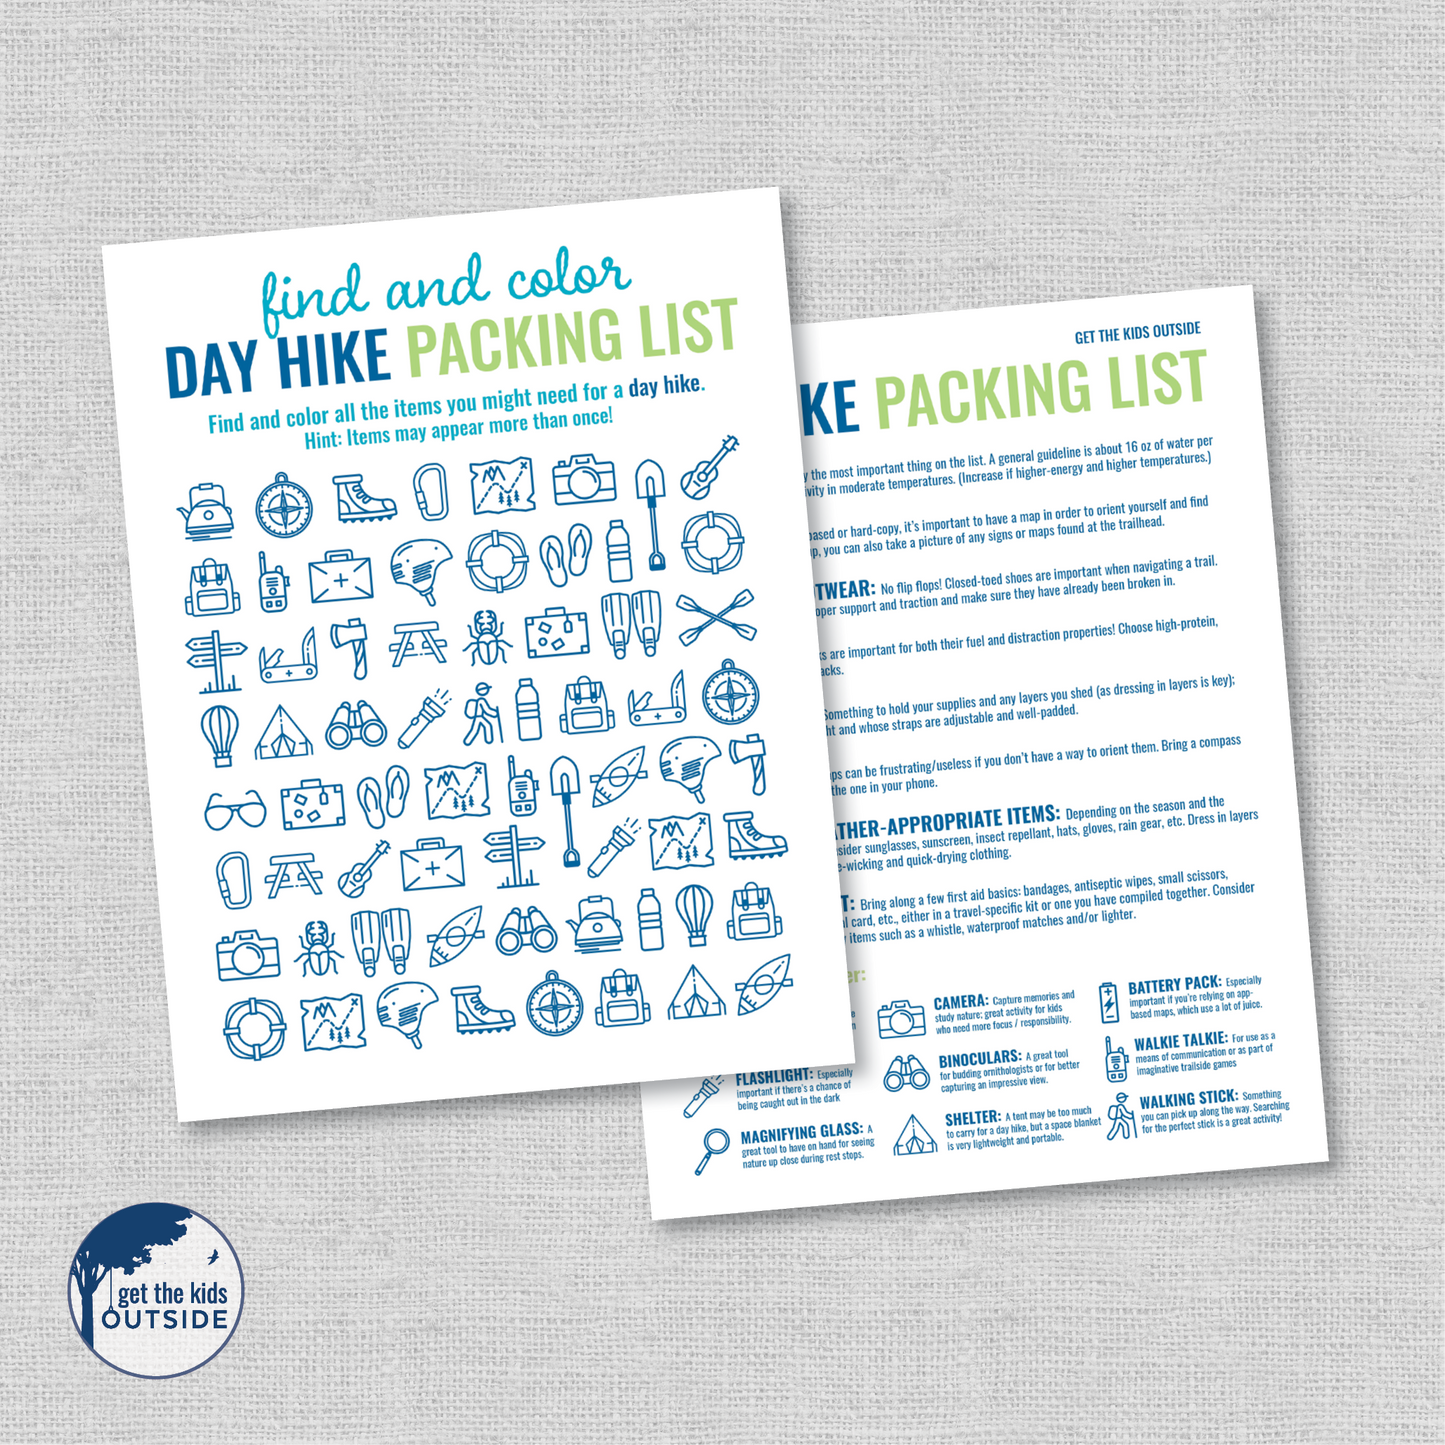 Find and Color: Day Hike Packing List